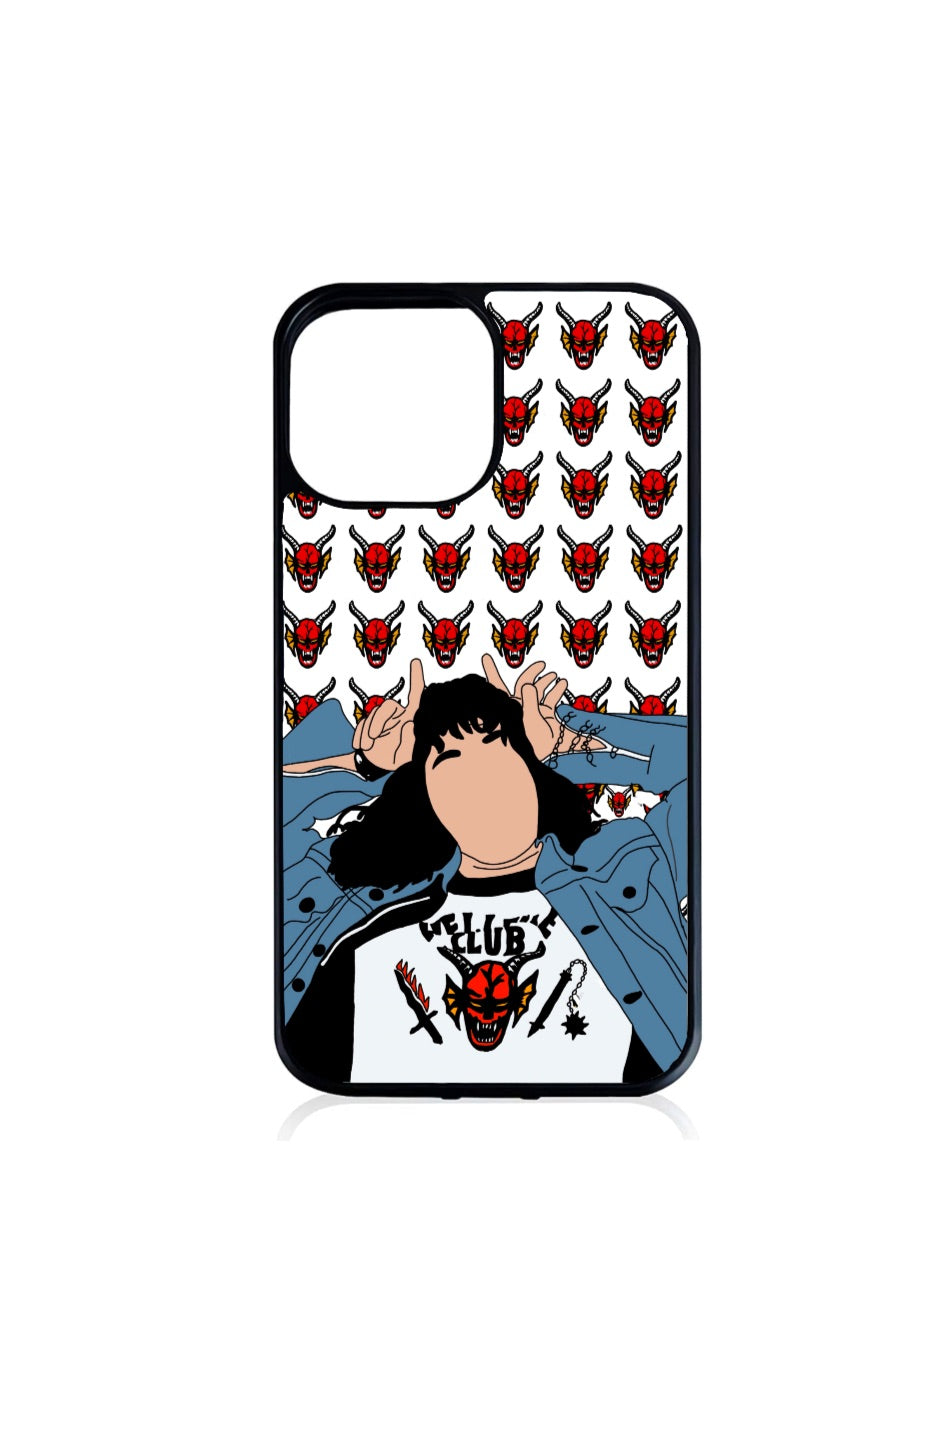 Eddie Munson 2 phone case - HPK Personalized Products and more